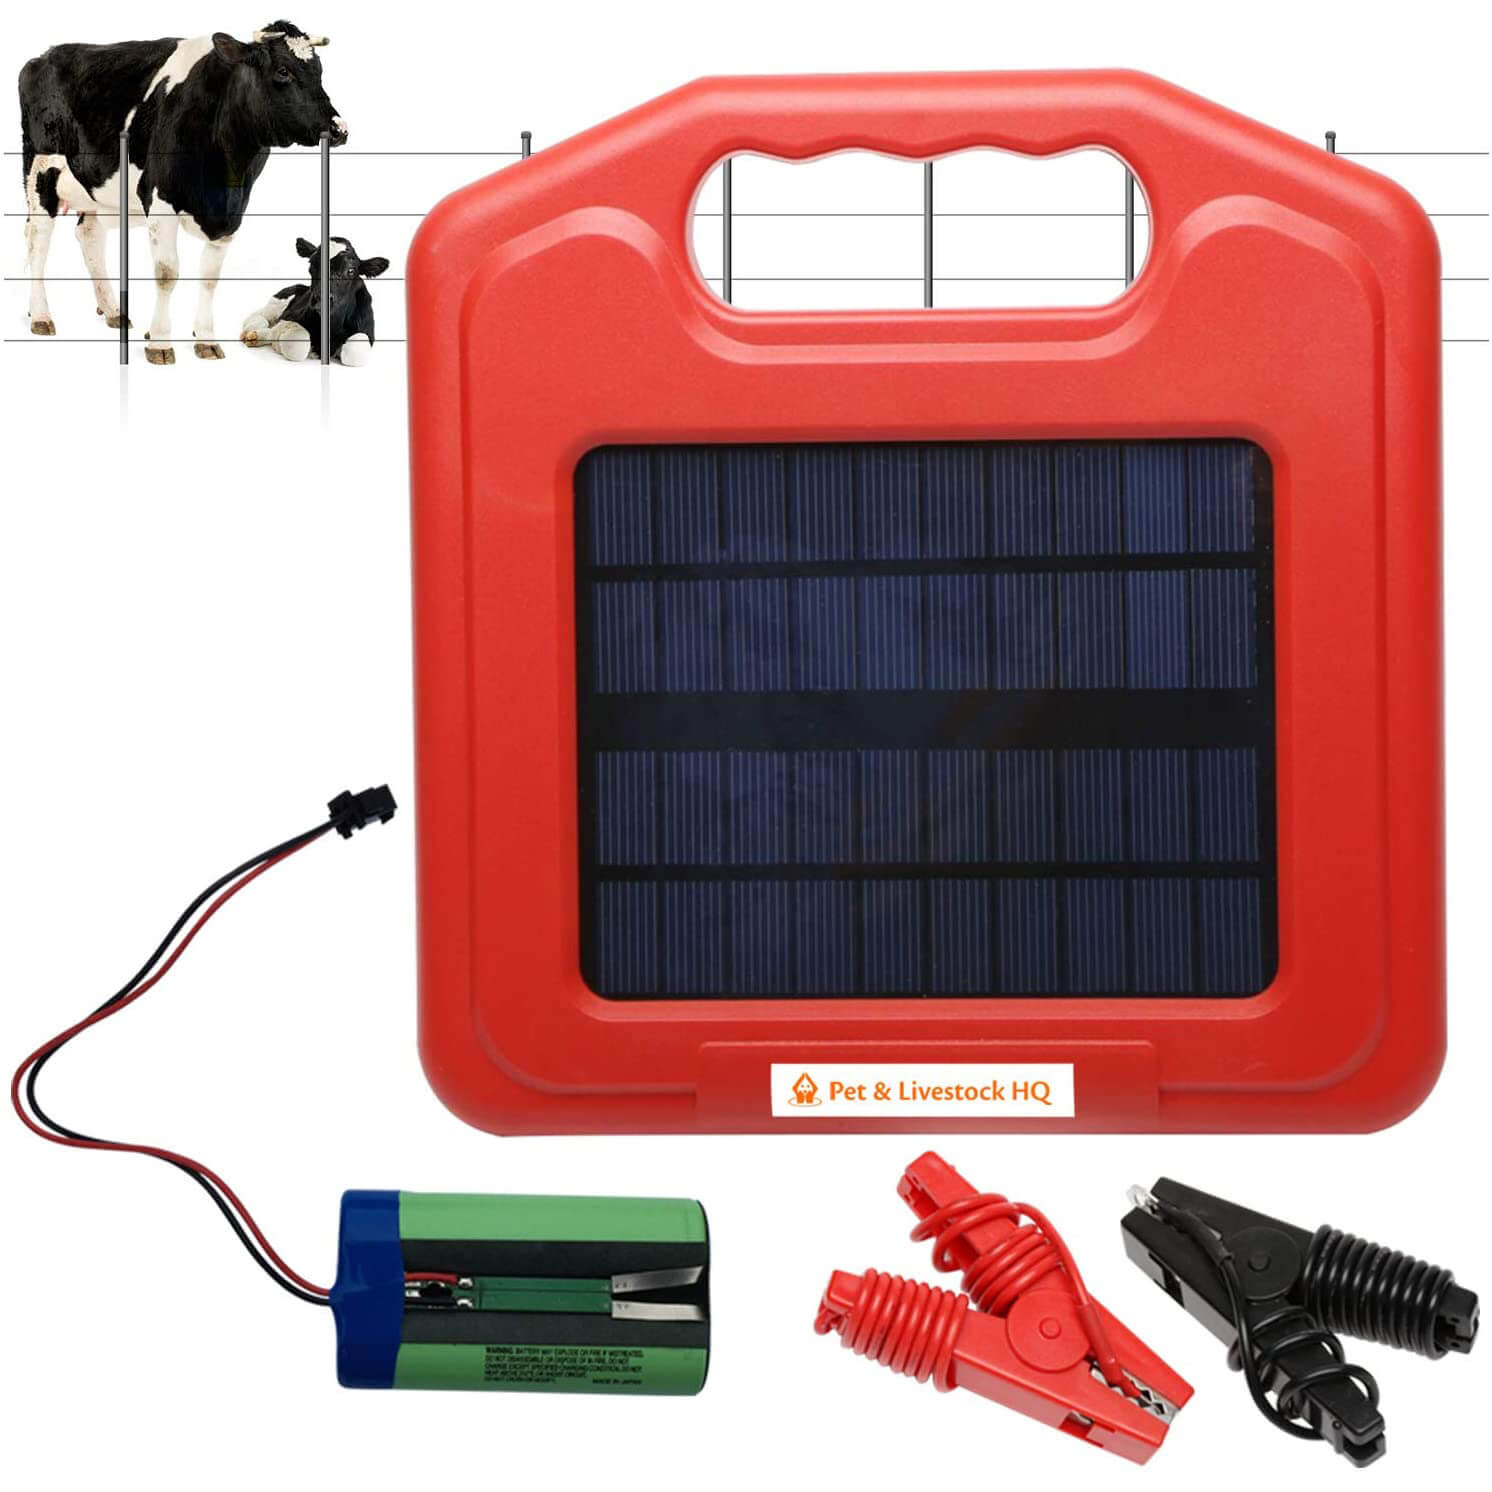 Pet & Livestock HQ Solar Powered Fence Charger (w/Sign)